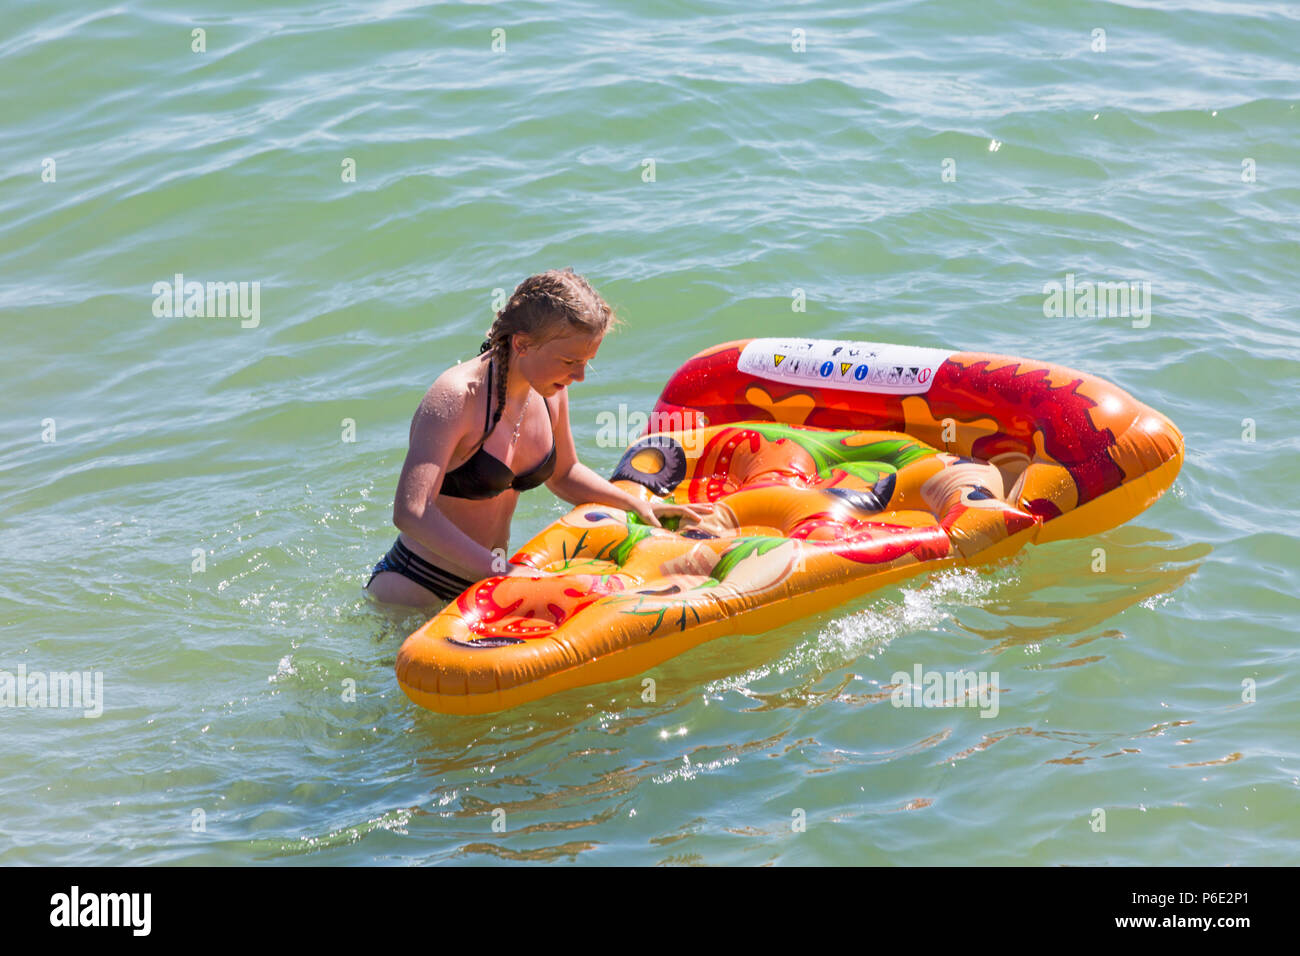 Bournemouth, Dorset, UK. 30th June 2018. UK weather: the heatwave continues and another hot sunny day at Bournemouth beaches as sunseekers head to the seaside. A slight breeze makes the heat more bearable. Piece of pizza? Young woman teen having fun cooling down in the sea with inflatable pizza. Stock Photo